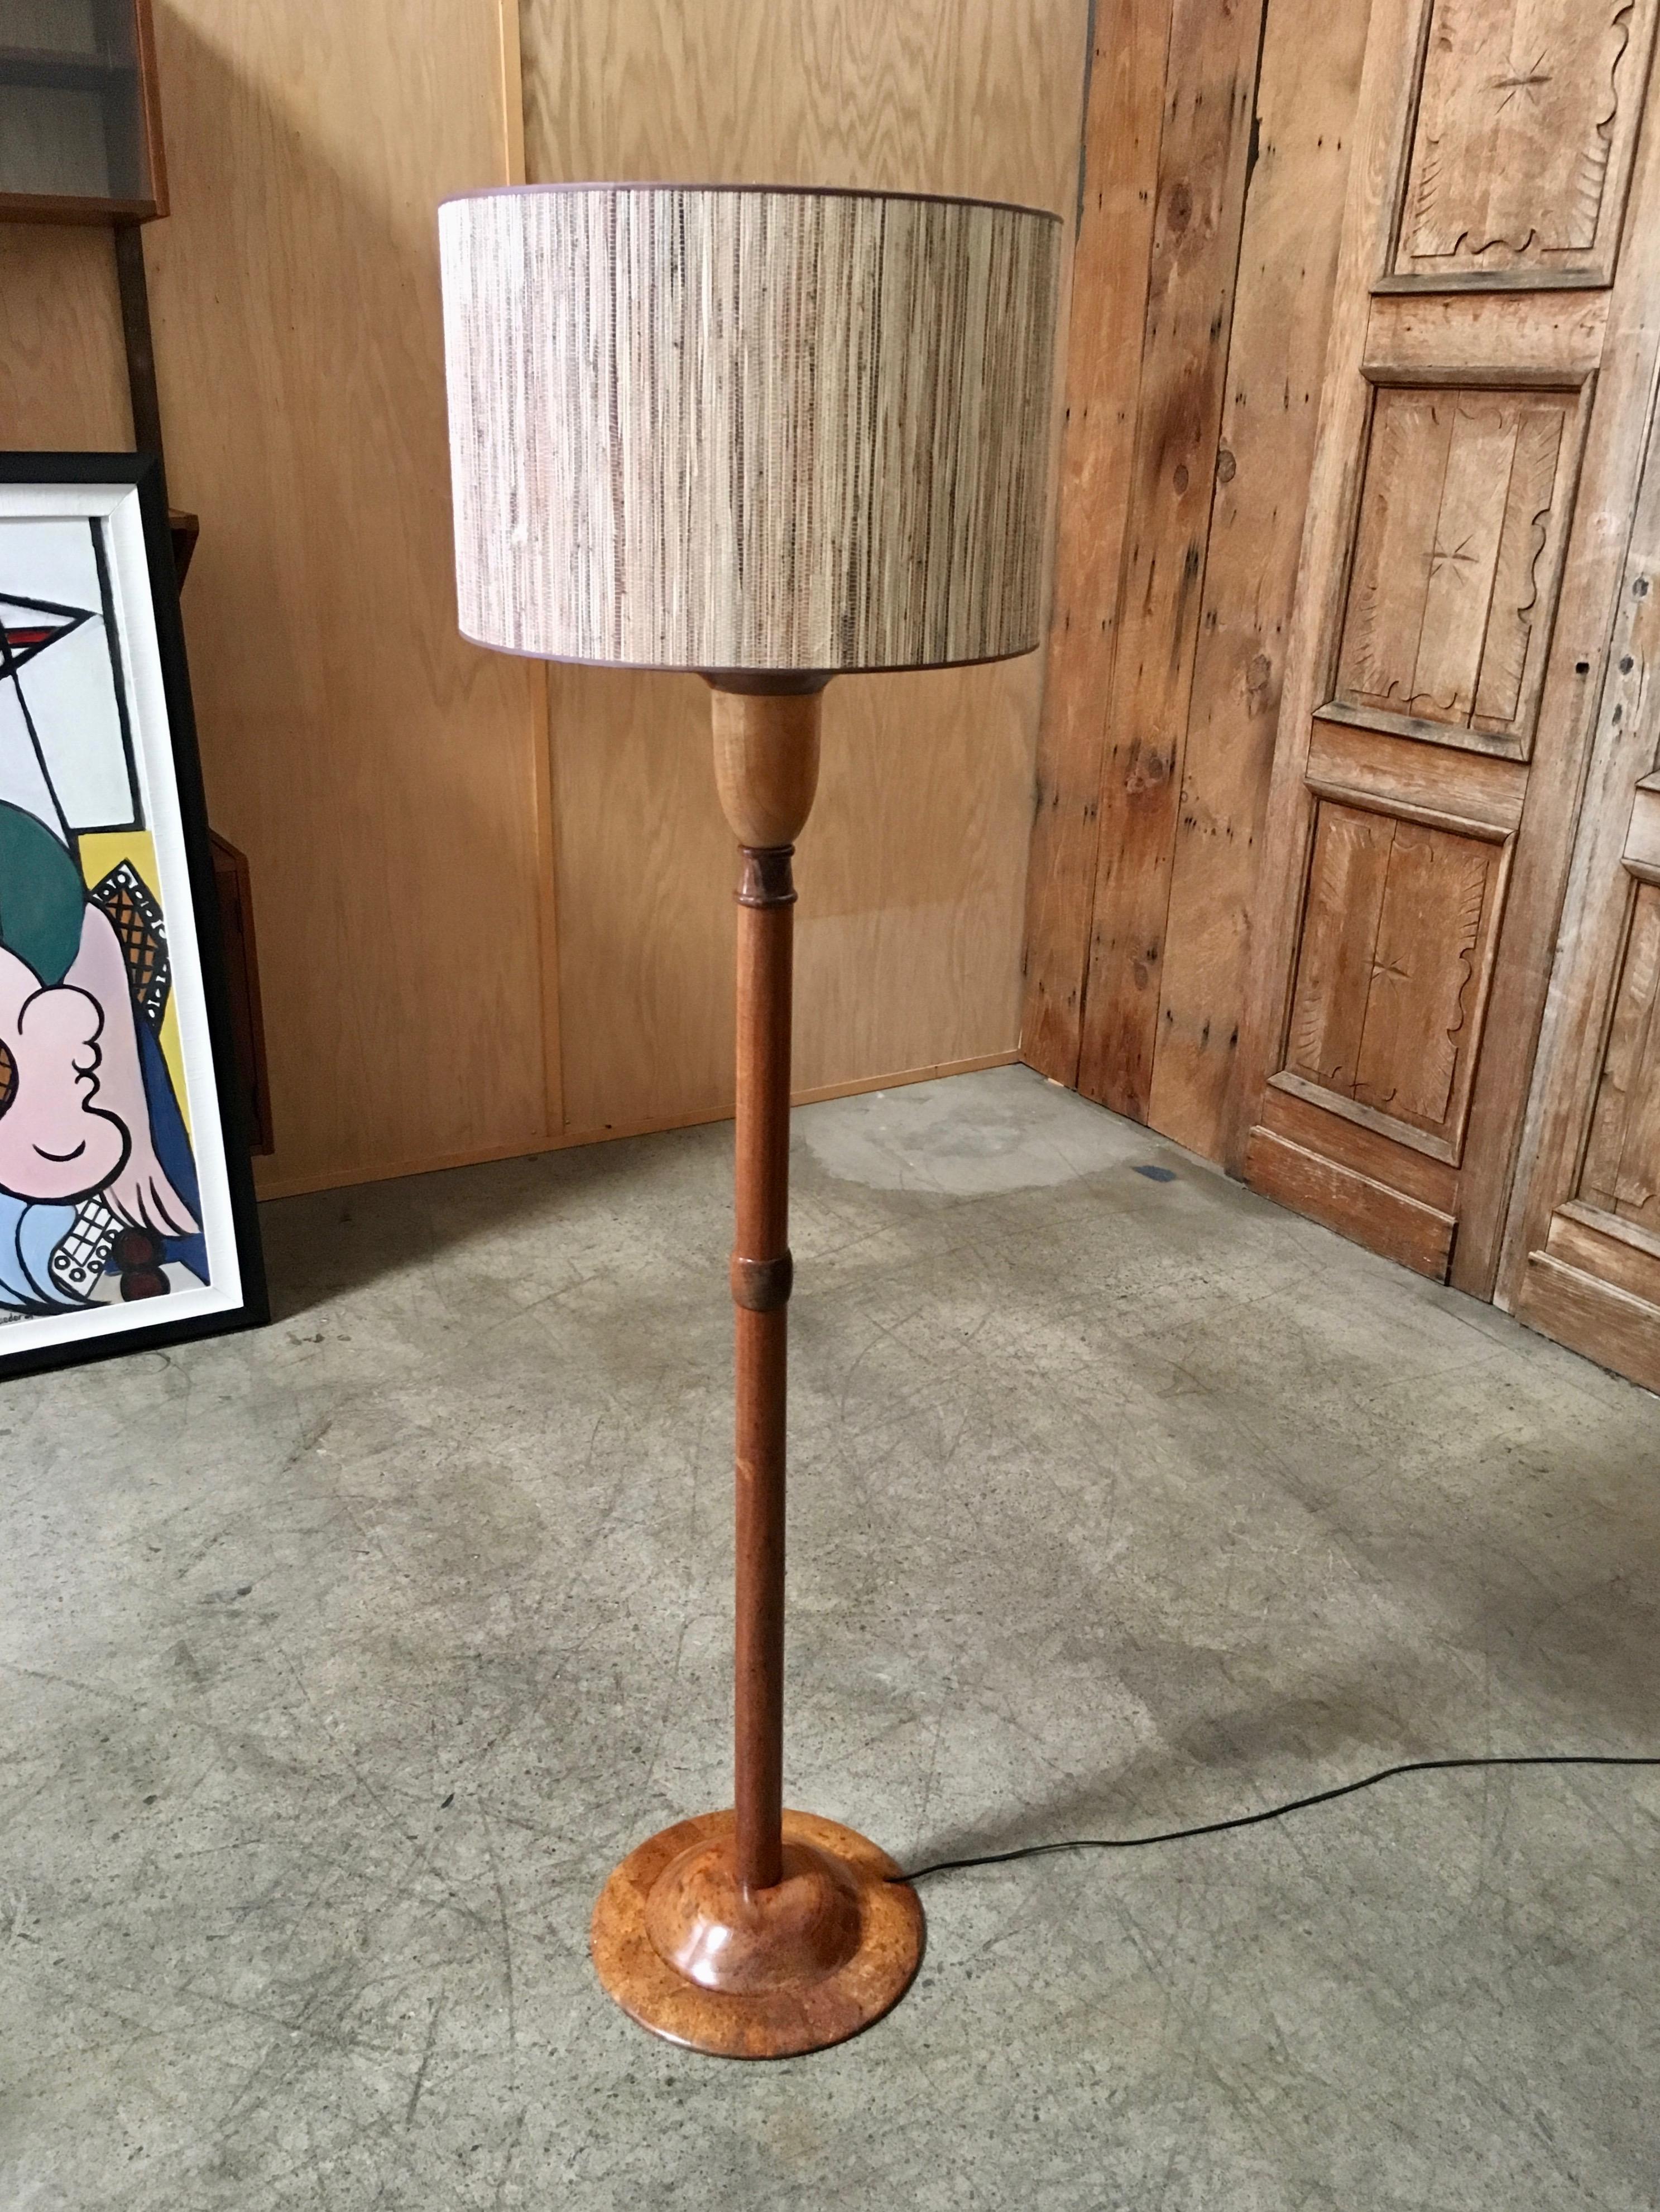 Handcrafted floor lamp turned Koa wood with new shade.